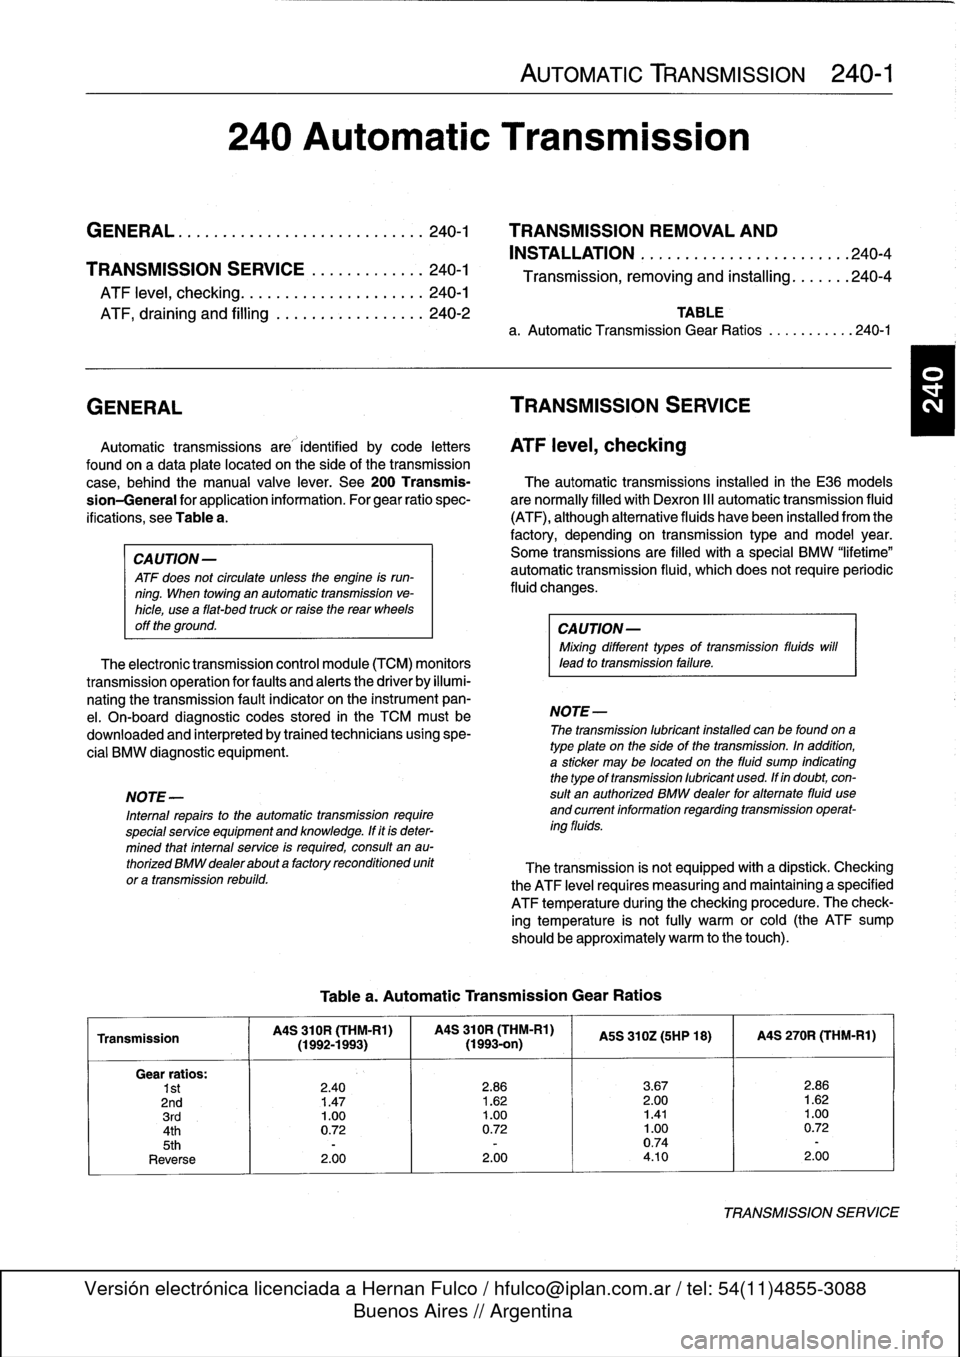 BMW 323i 1995 E36 Workshop Manual 
AUTOMATIC
TRANSMISSION

	

240-1

240
Automatic
Transmission

GENERAL
.....
.
.
.
.
.
.
.
.
.
.
.
.
.
.........
.
240-1

	

TRANSMISSION
REMOVAL
AND

INSTALLATION
..................
.
.
.
.
.240-4
TR